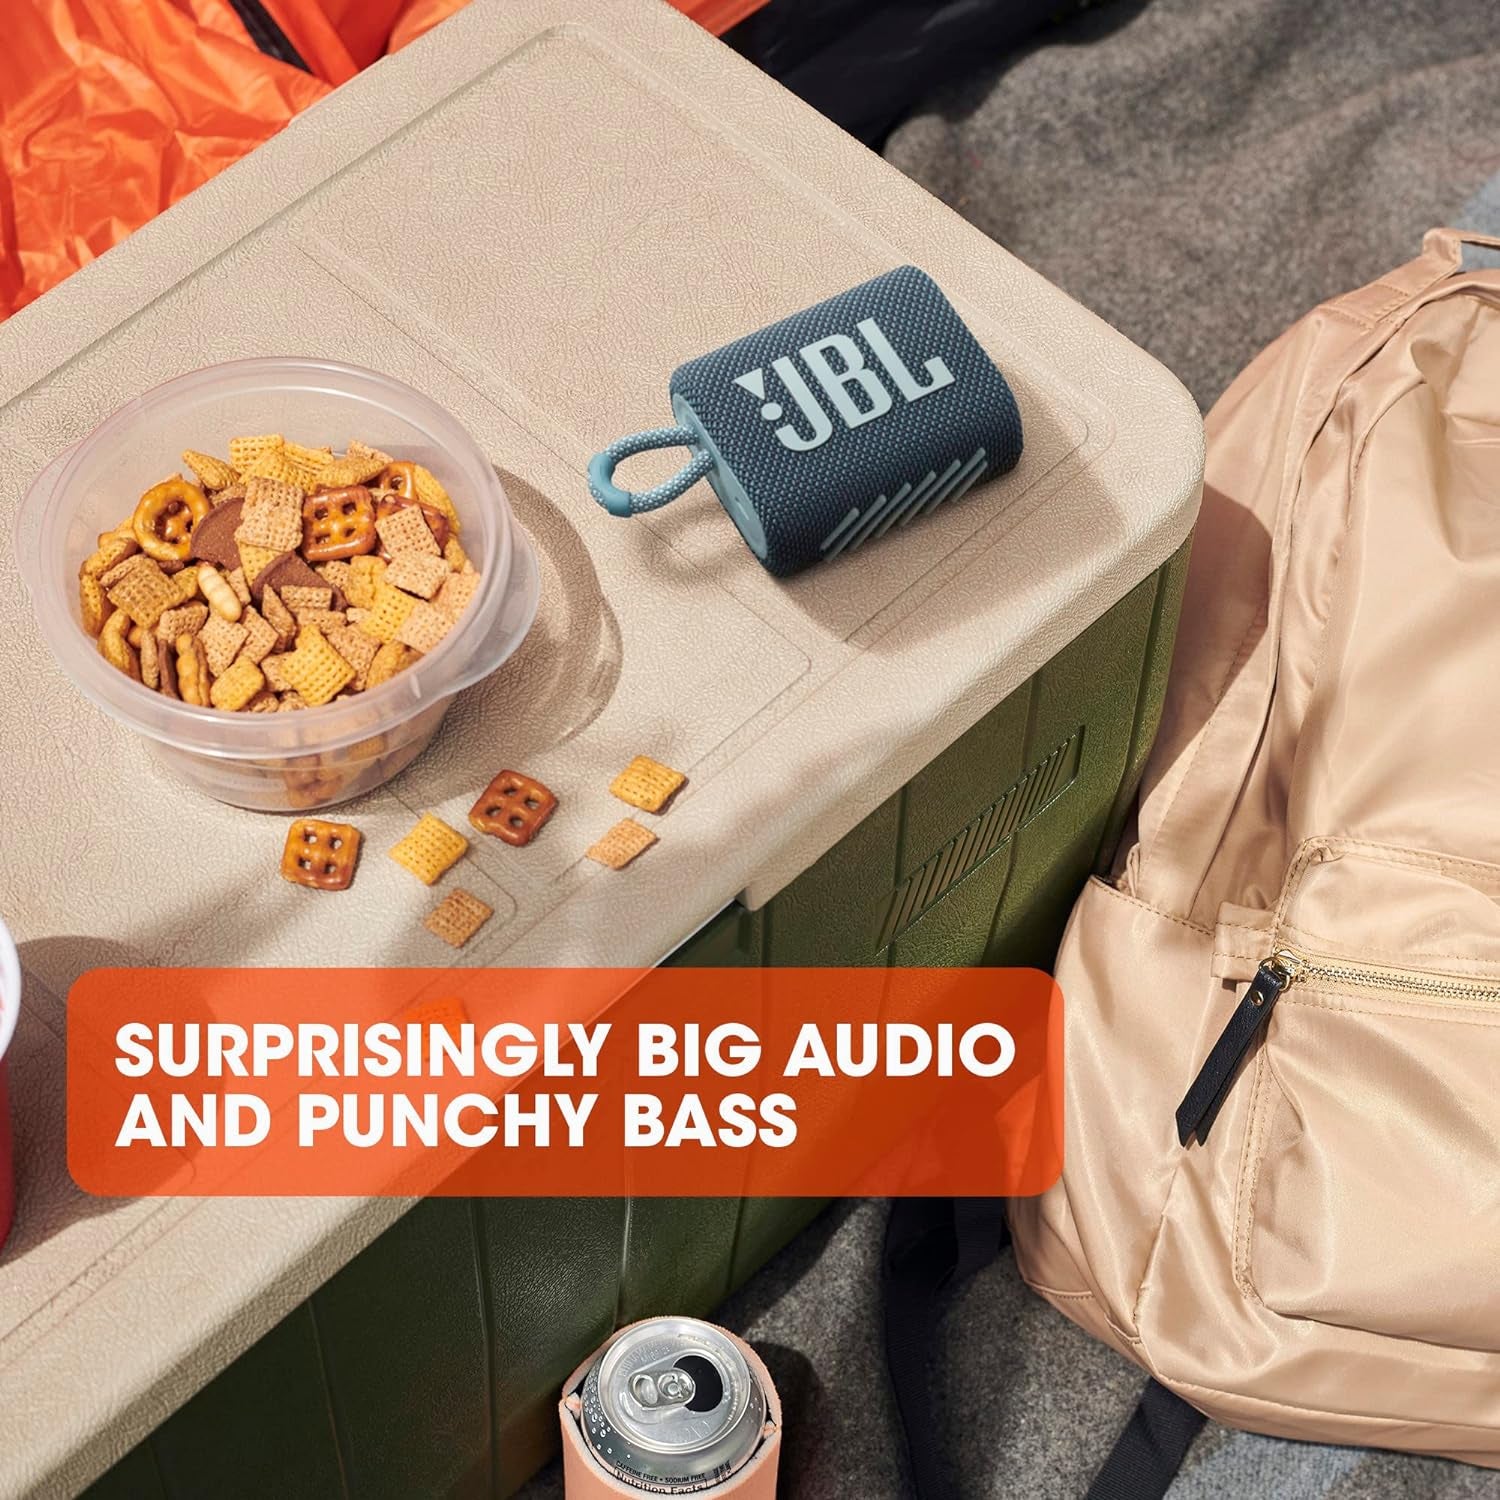 JBL Go 3: Portable Speaker with Bluetooth, Built-In Battery, Waterproof and Dustproof Feature - Black